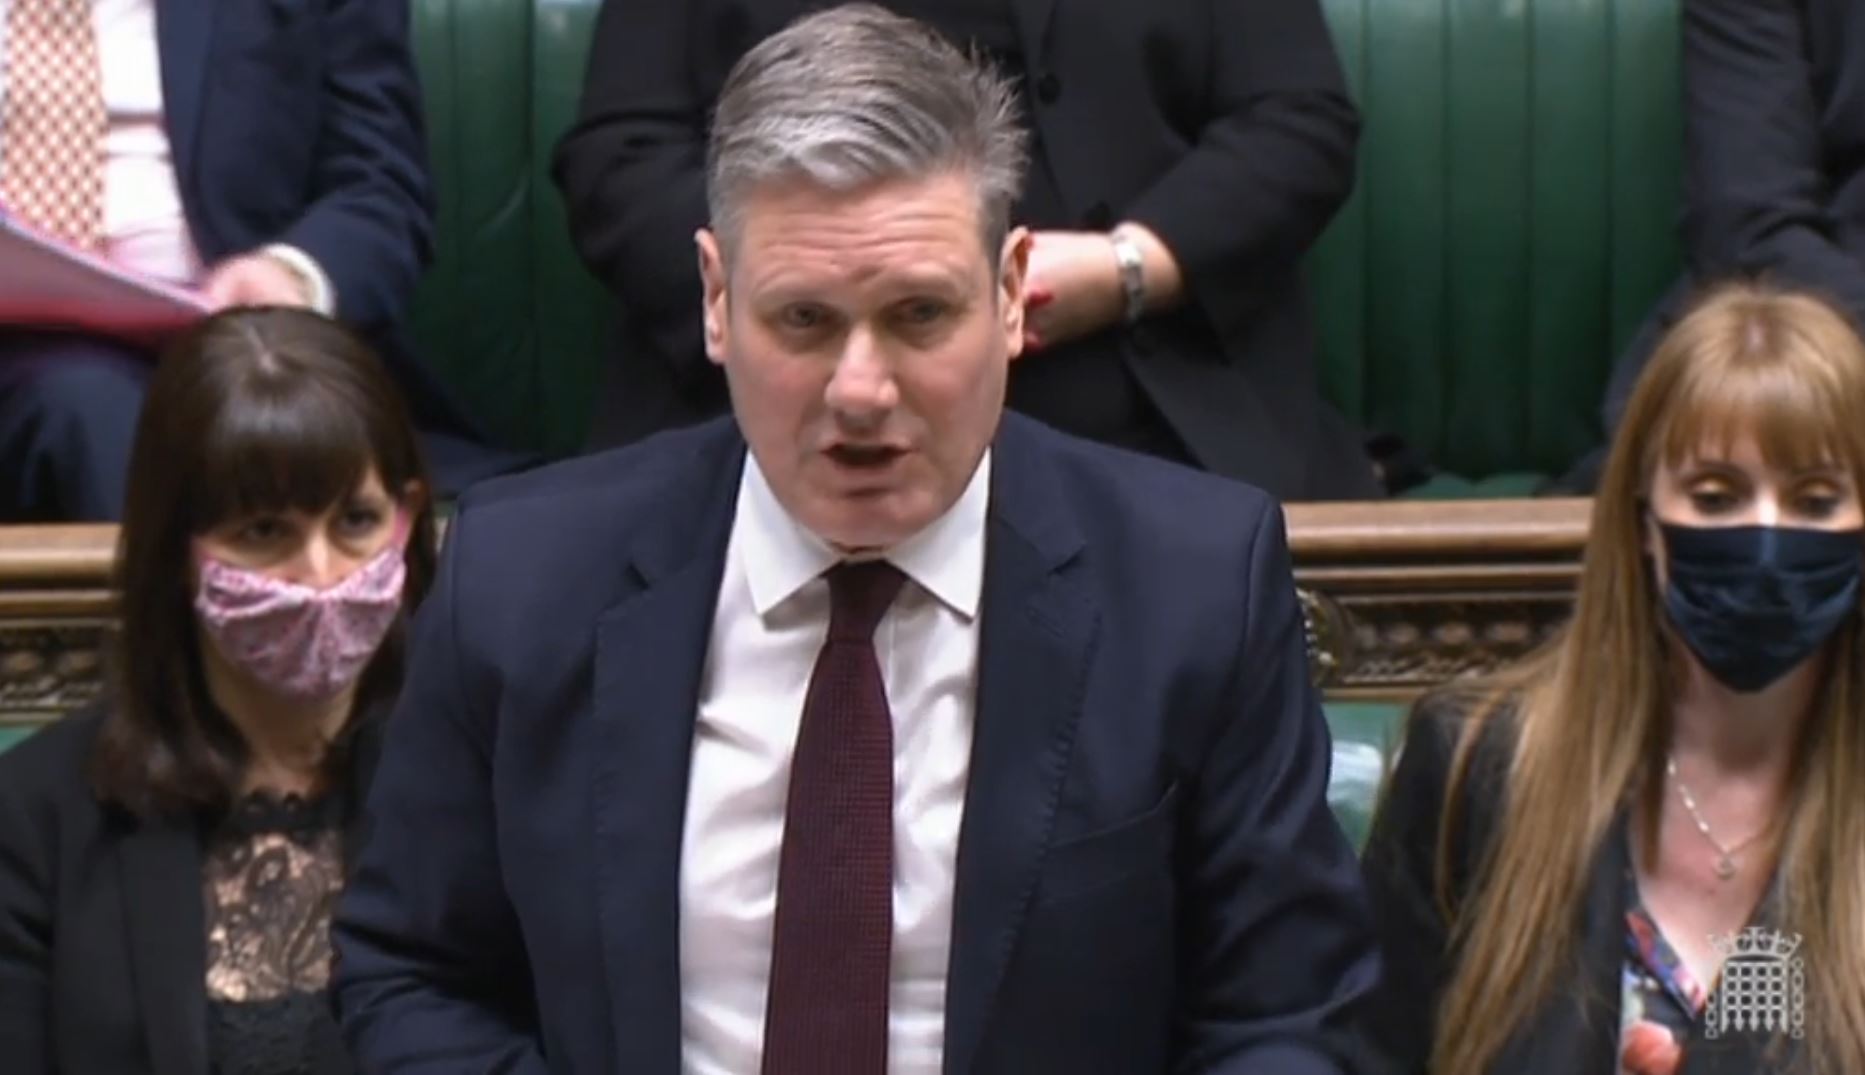 Labour leader Sir Keir Starmer responds to a statement by Prime Minister Boris Johnson to MPs in the House of Commons on the Sue Gray report on January 31.